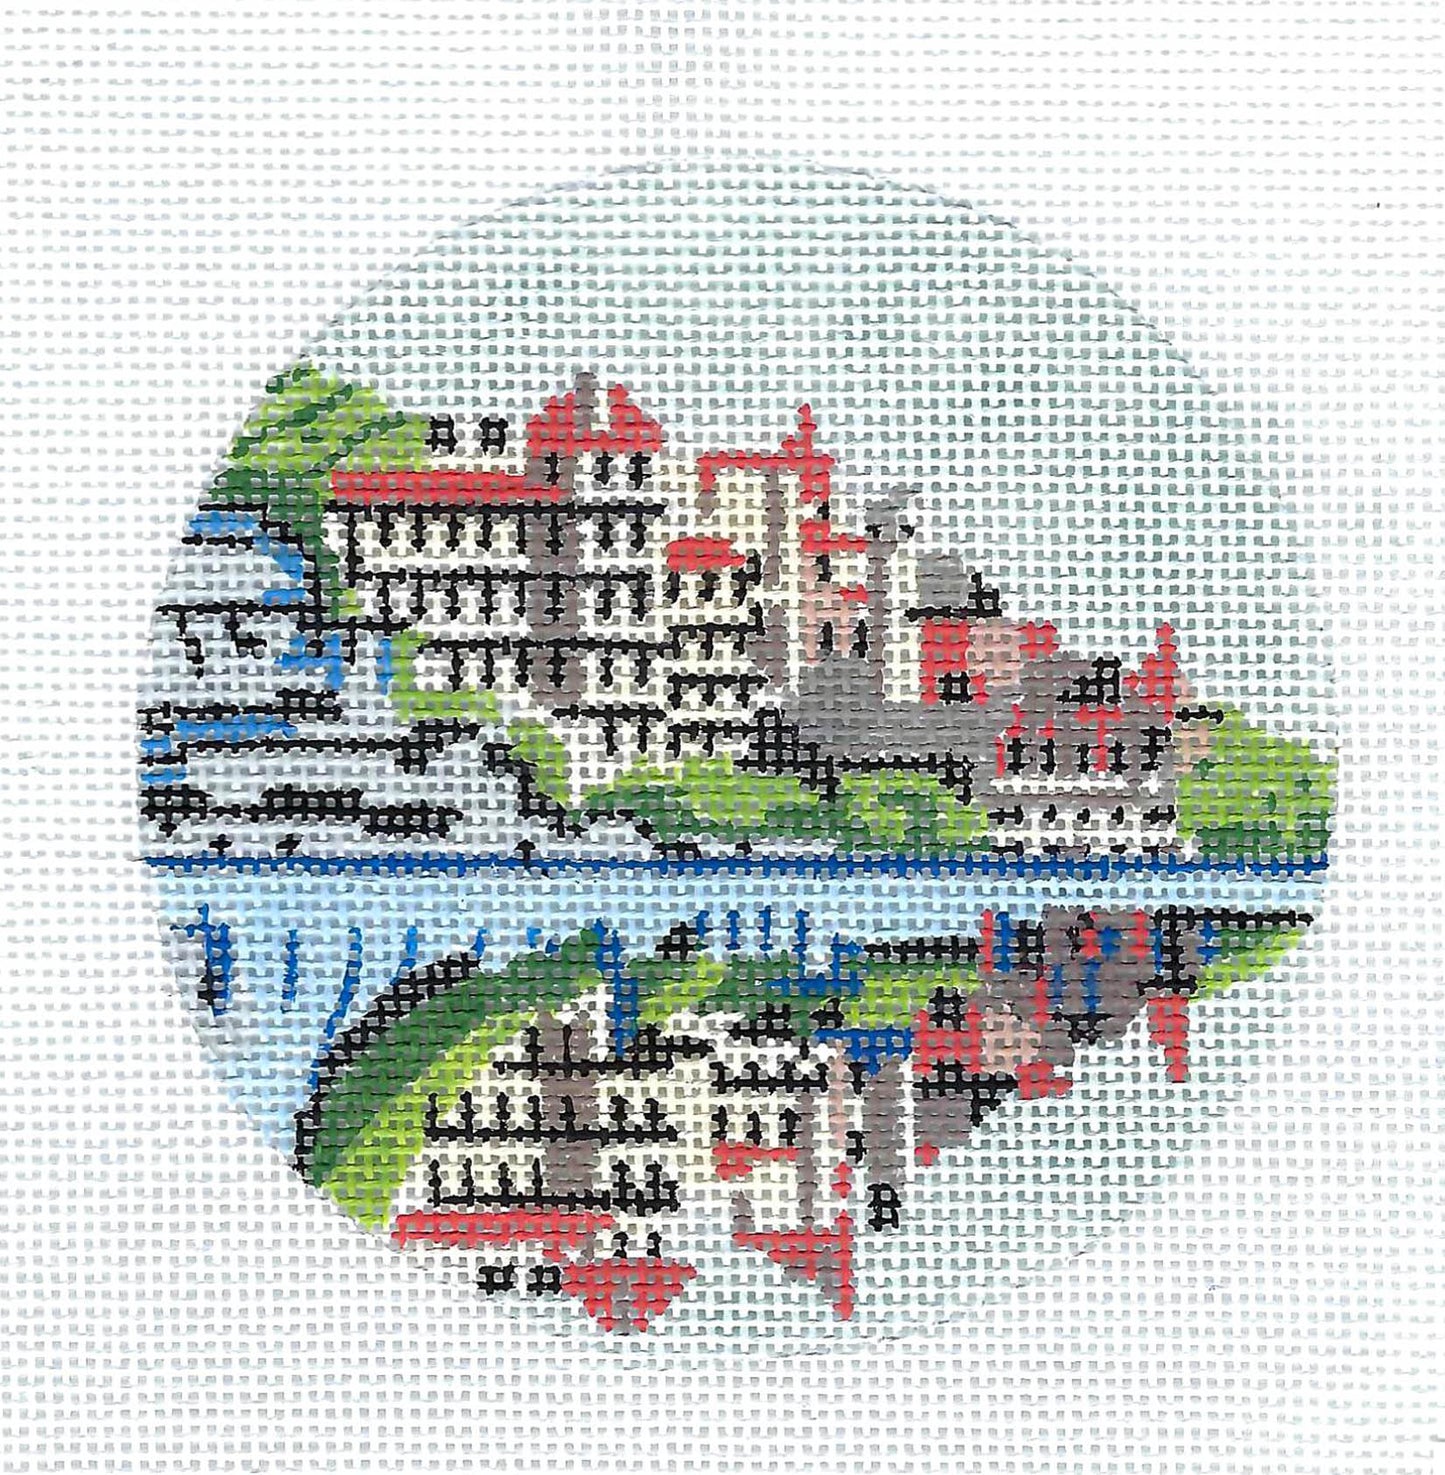 Travel Round ~ "Mohonk Mountain House" in New Paltz, New York handpainted Needlepoint Canvas by Purple Palm